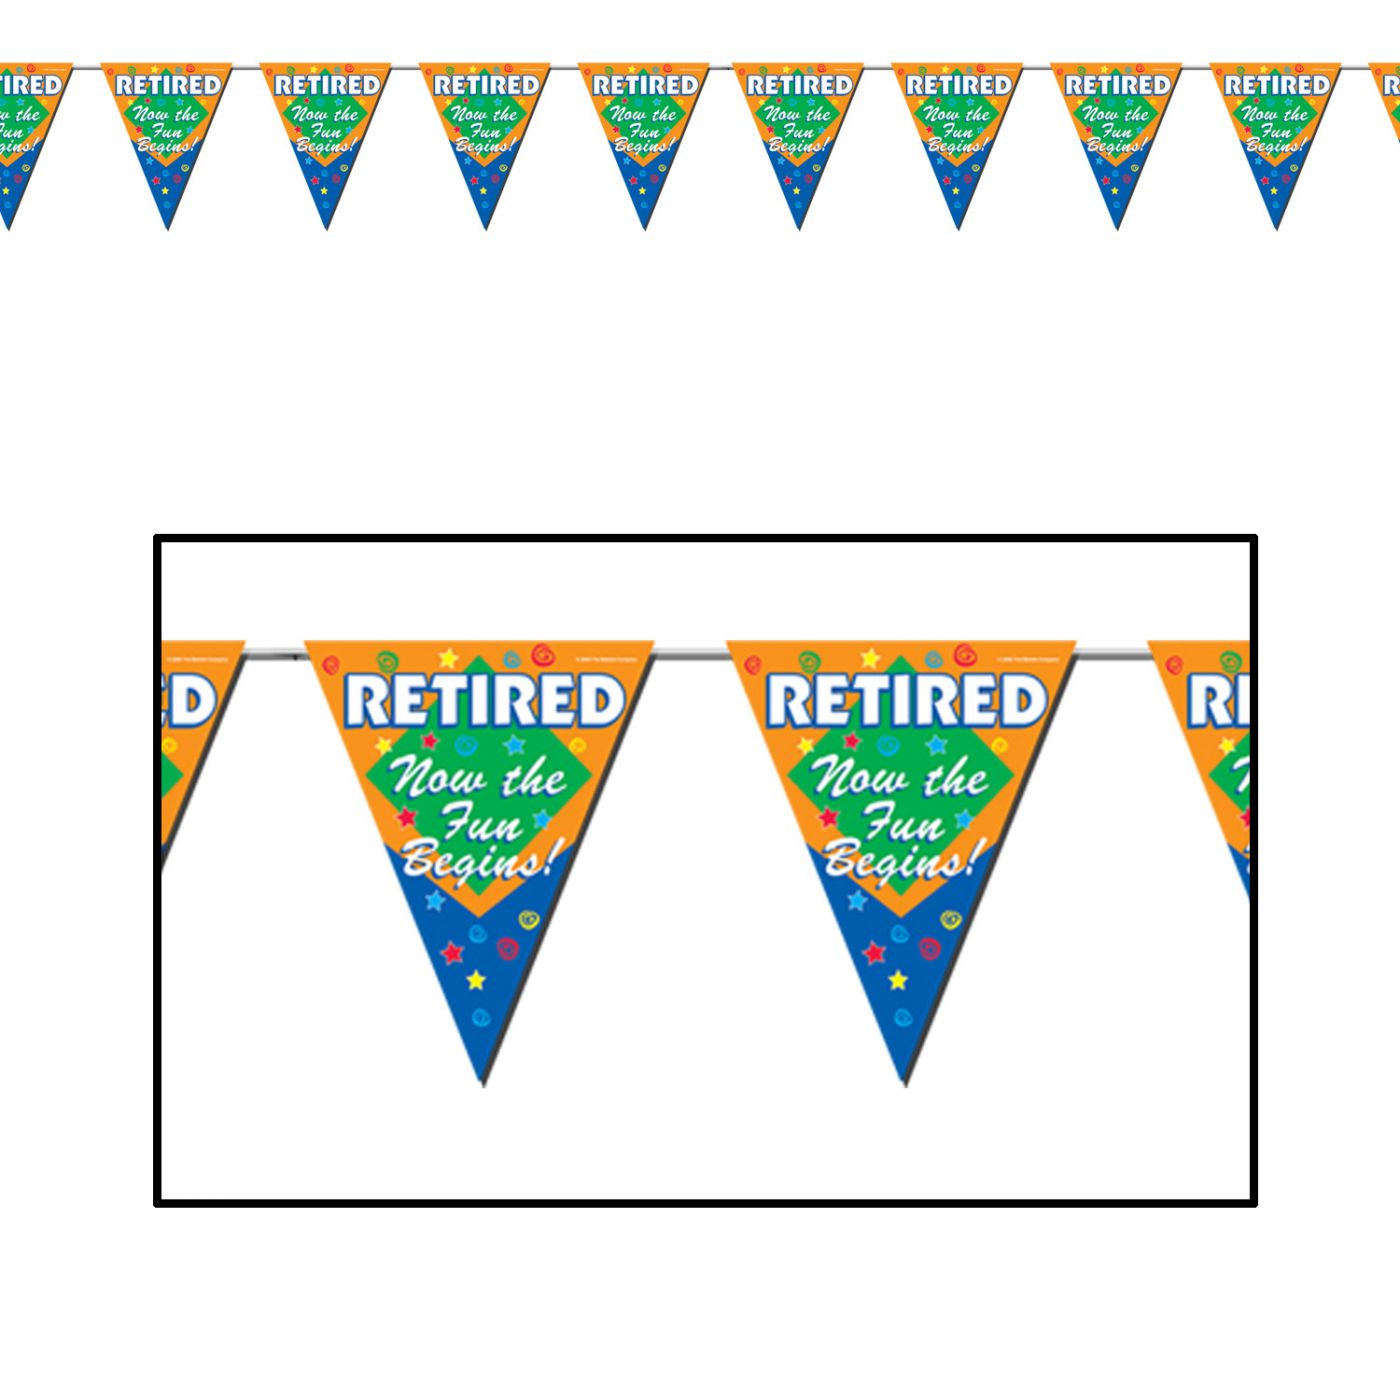 Retired The Fun Begins! Pennant Banner (12) image